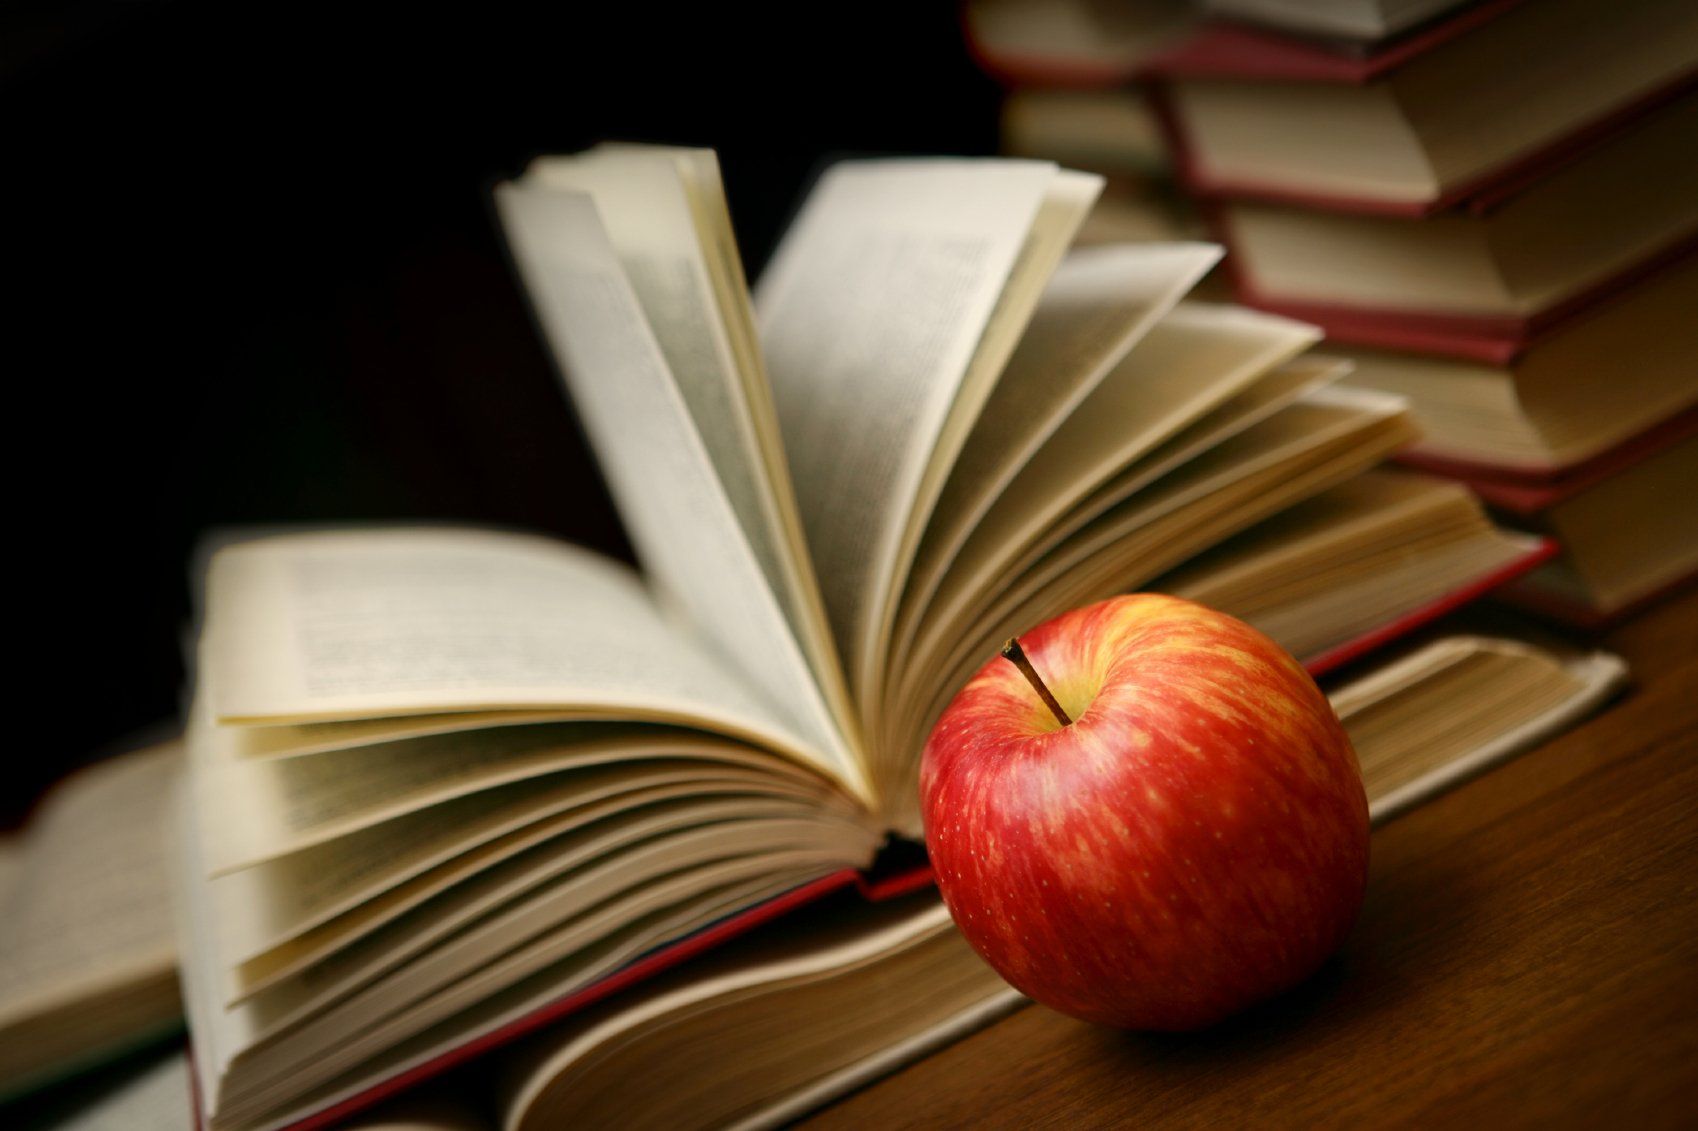 Commit to Lifelong Learning. Open book on desk, next to a red apple